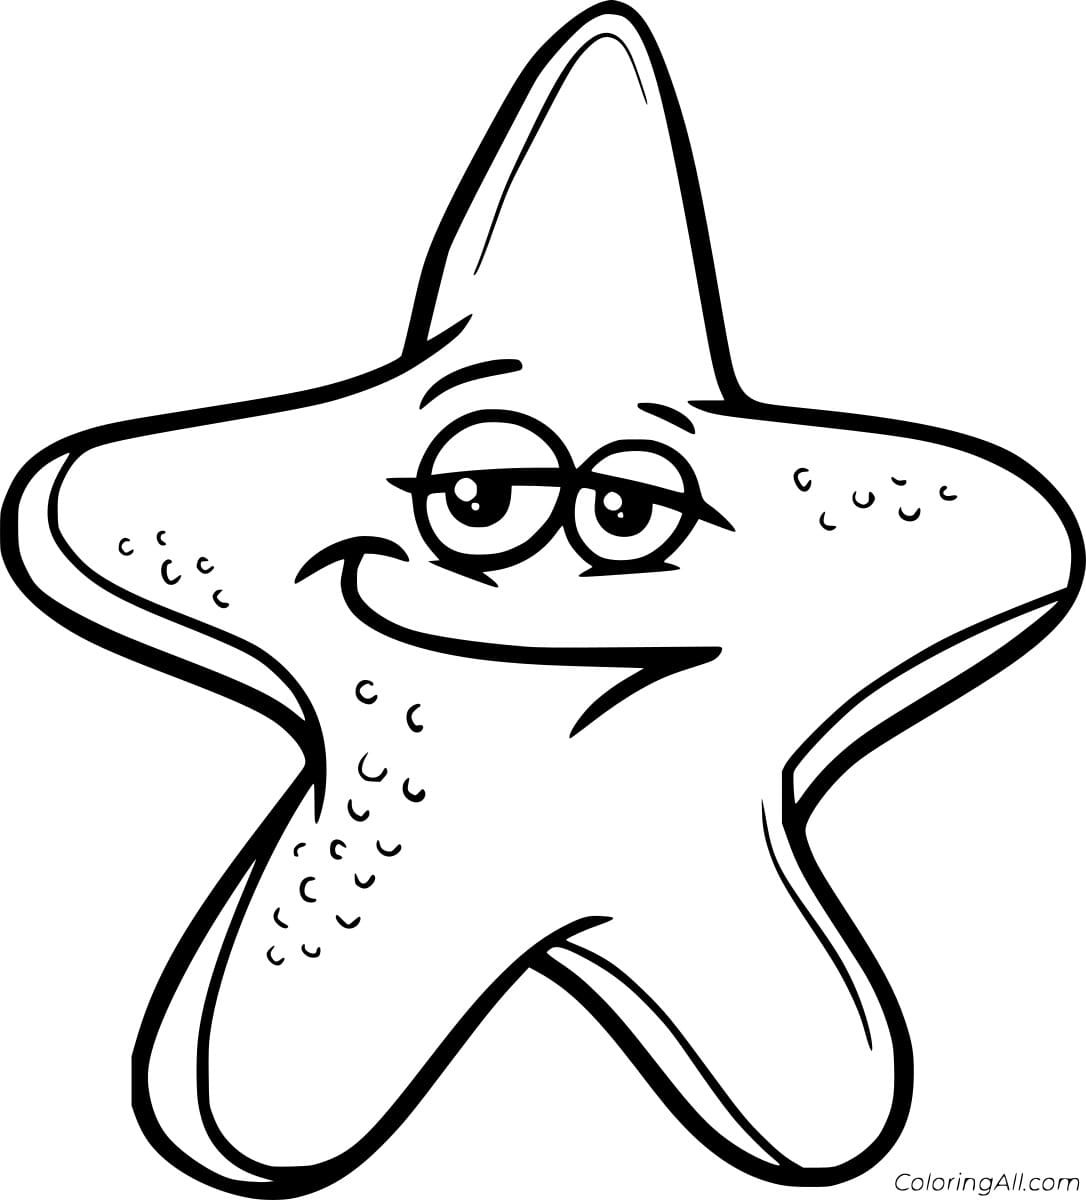 Little Starfish Image Coloring Page